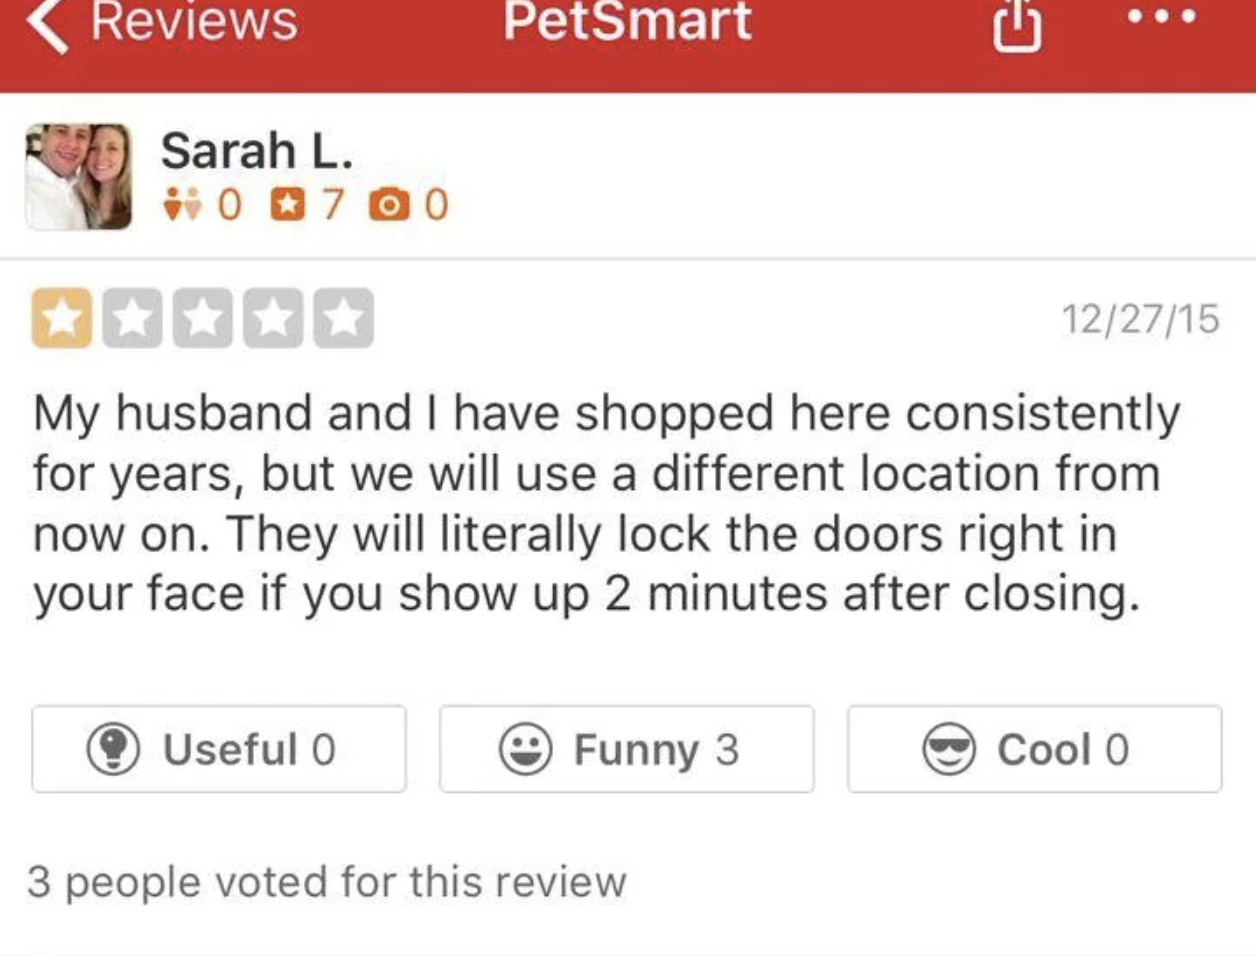 screenshot - Reviews Sarah L. 0700 PetSmart C 122715 My husband and I have shopped here consistently for years, but we will use a different location from now on. They will literally lock the doors right in your face if you show up 2 minutes after closing.